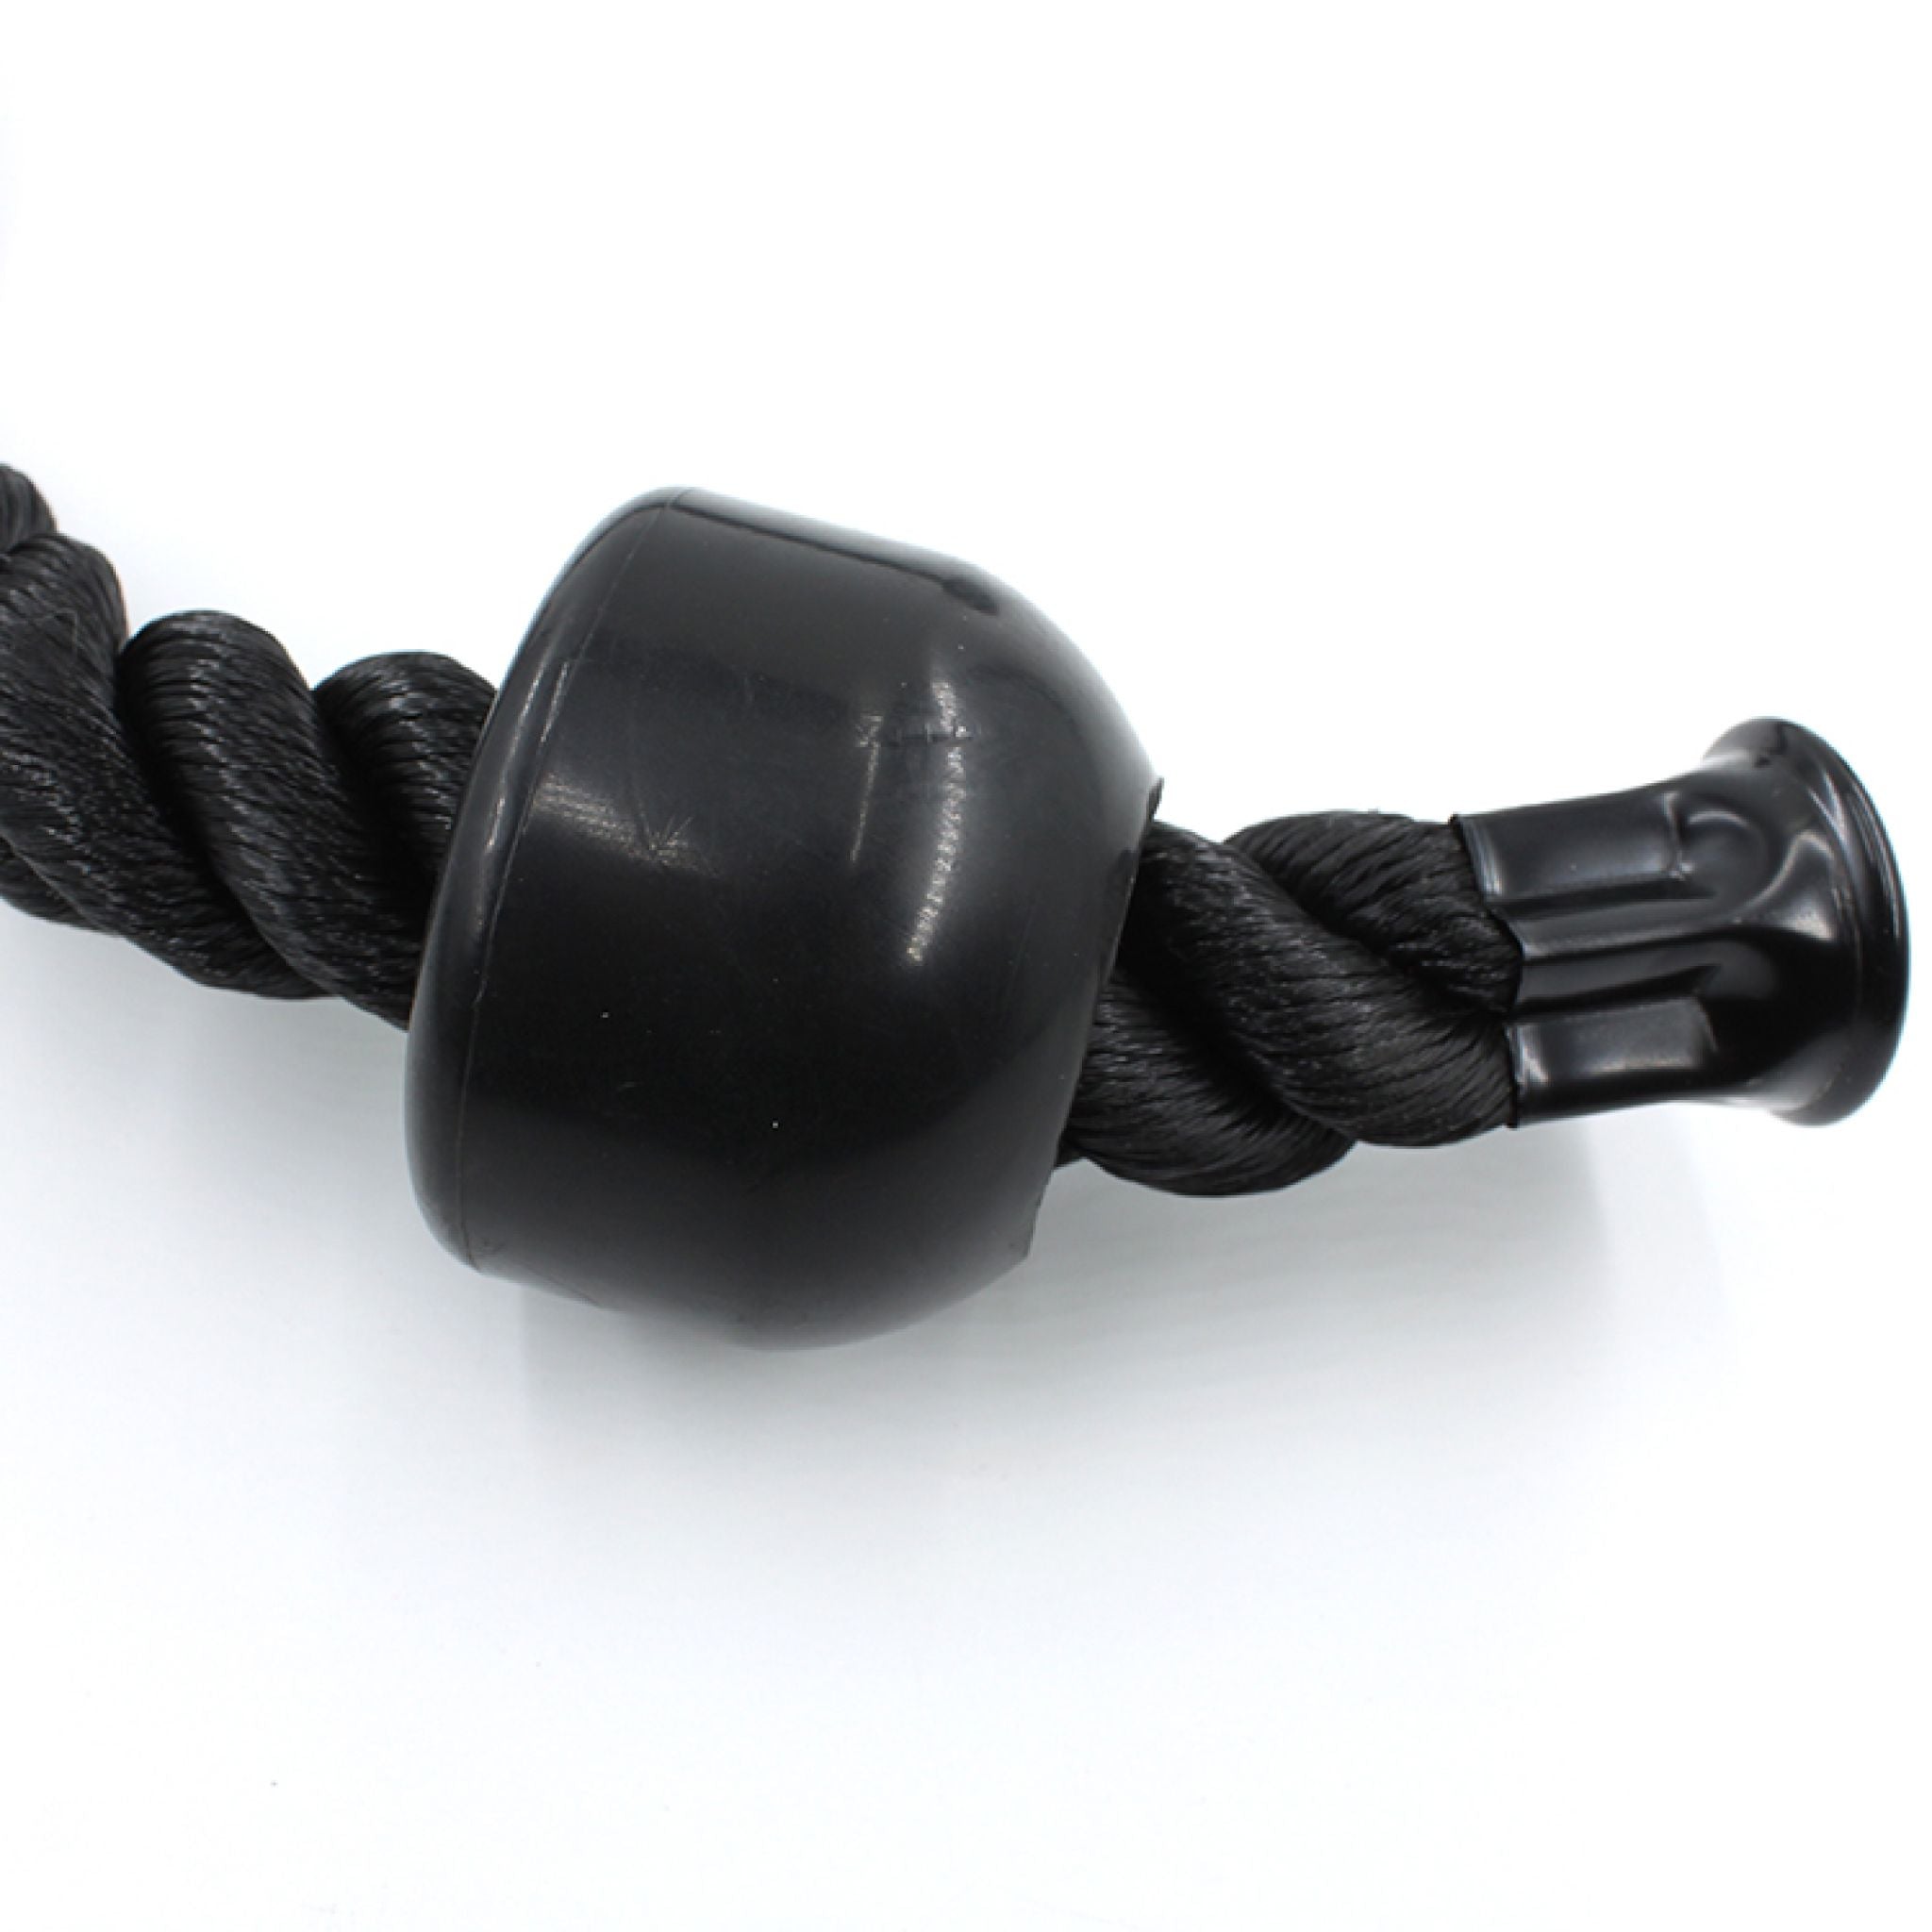 The plastic covering and end cap on the Triceps Rope Cable Attachment at Express Gym Supply